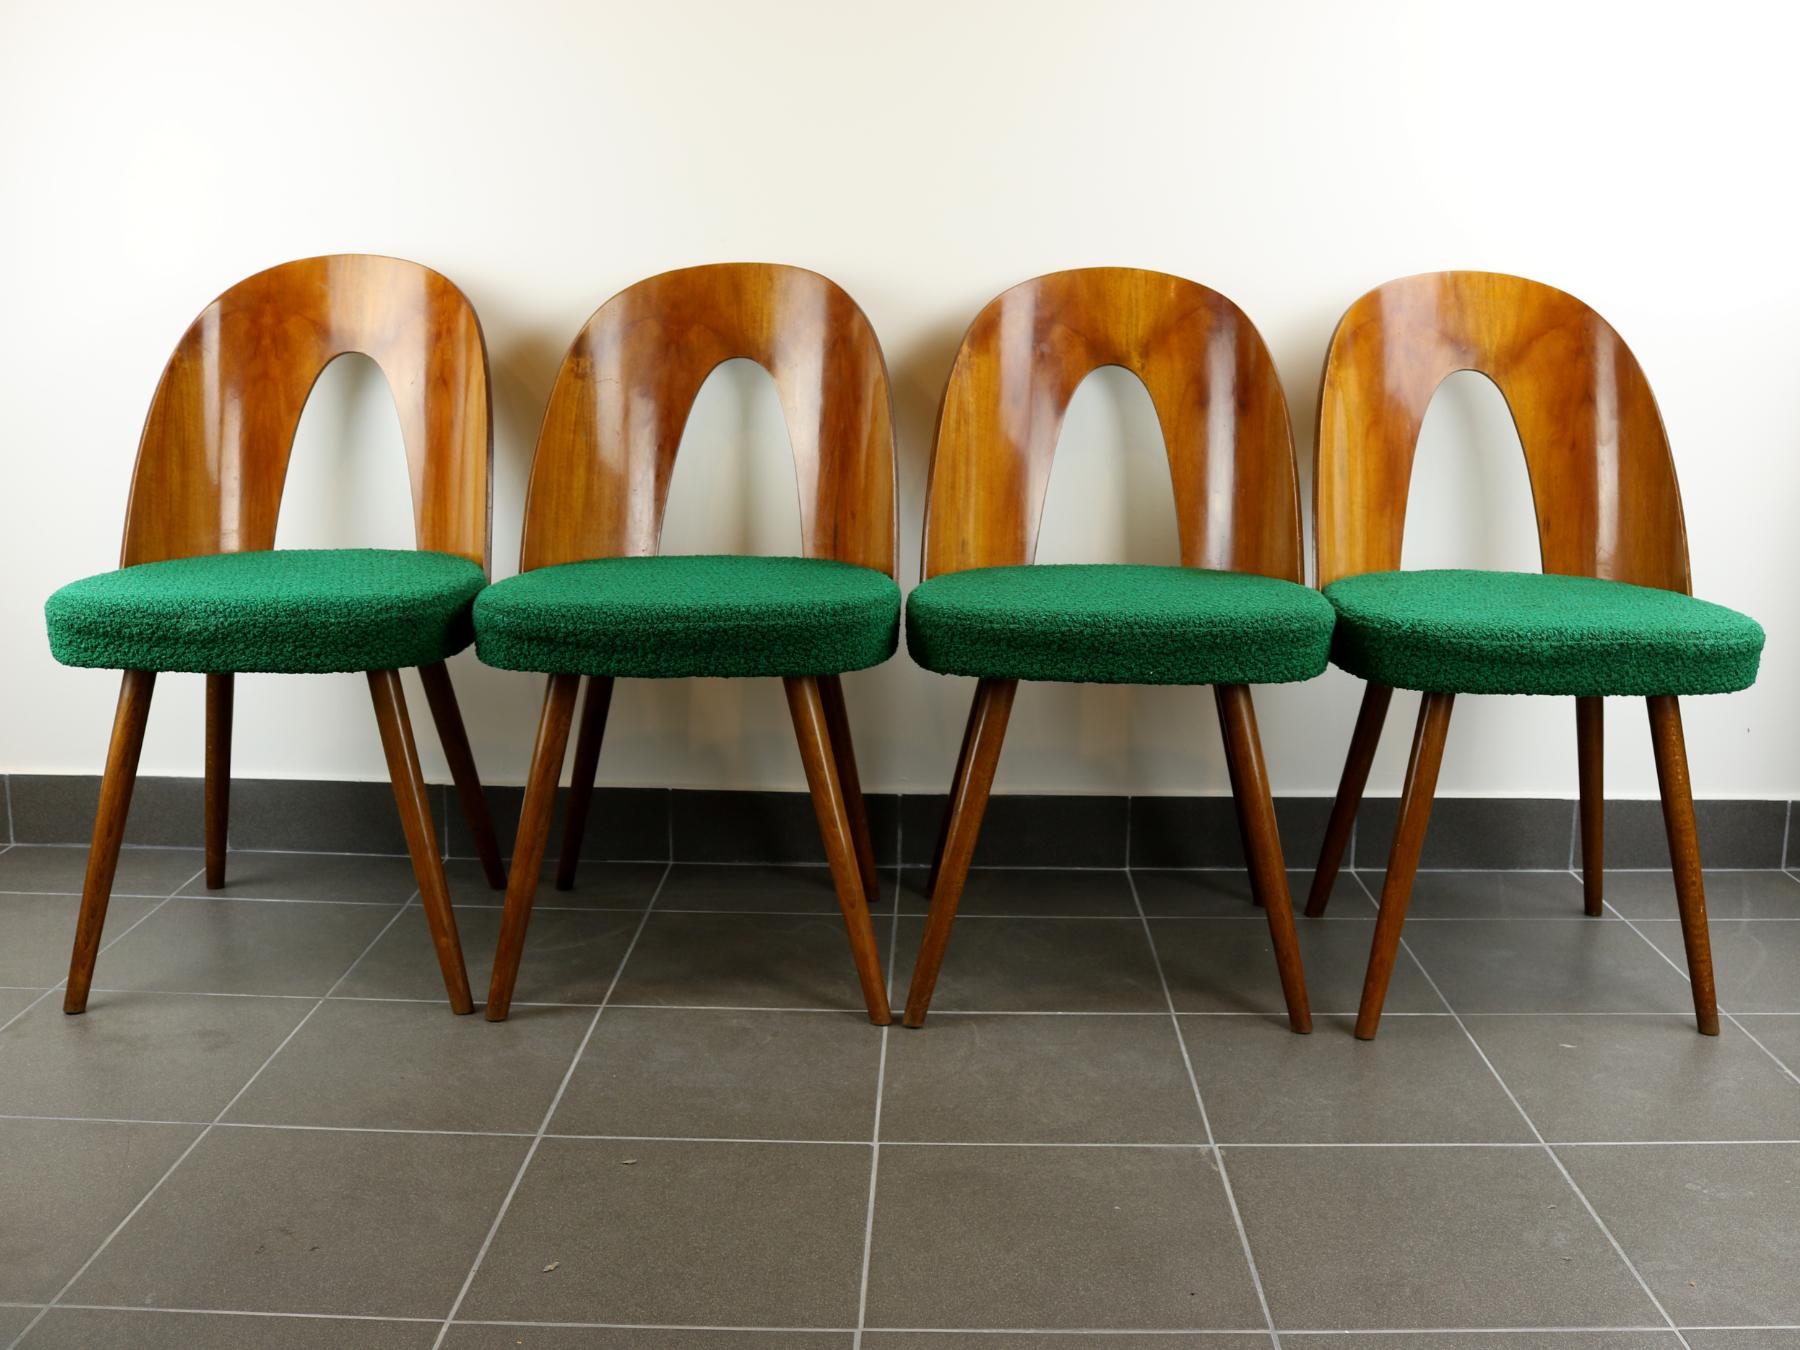 These chairs were designed by Antonin Suman, and were manufactured by the Tatra Nabytok Company, in the 1960s, in Czechoslovakia. Their green original fabric is still in perfect condition.